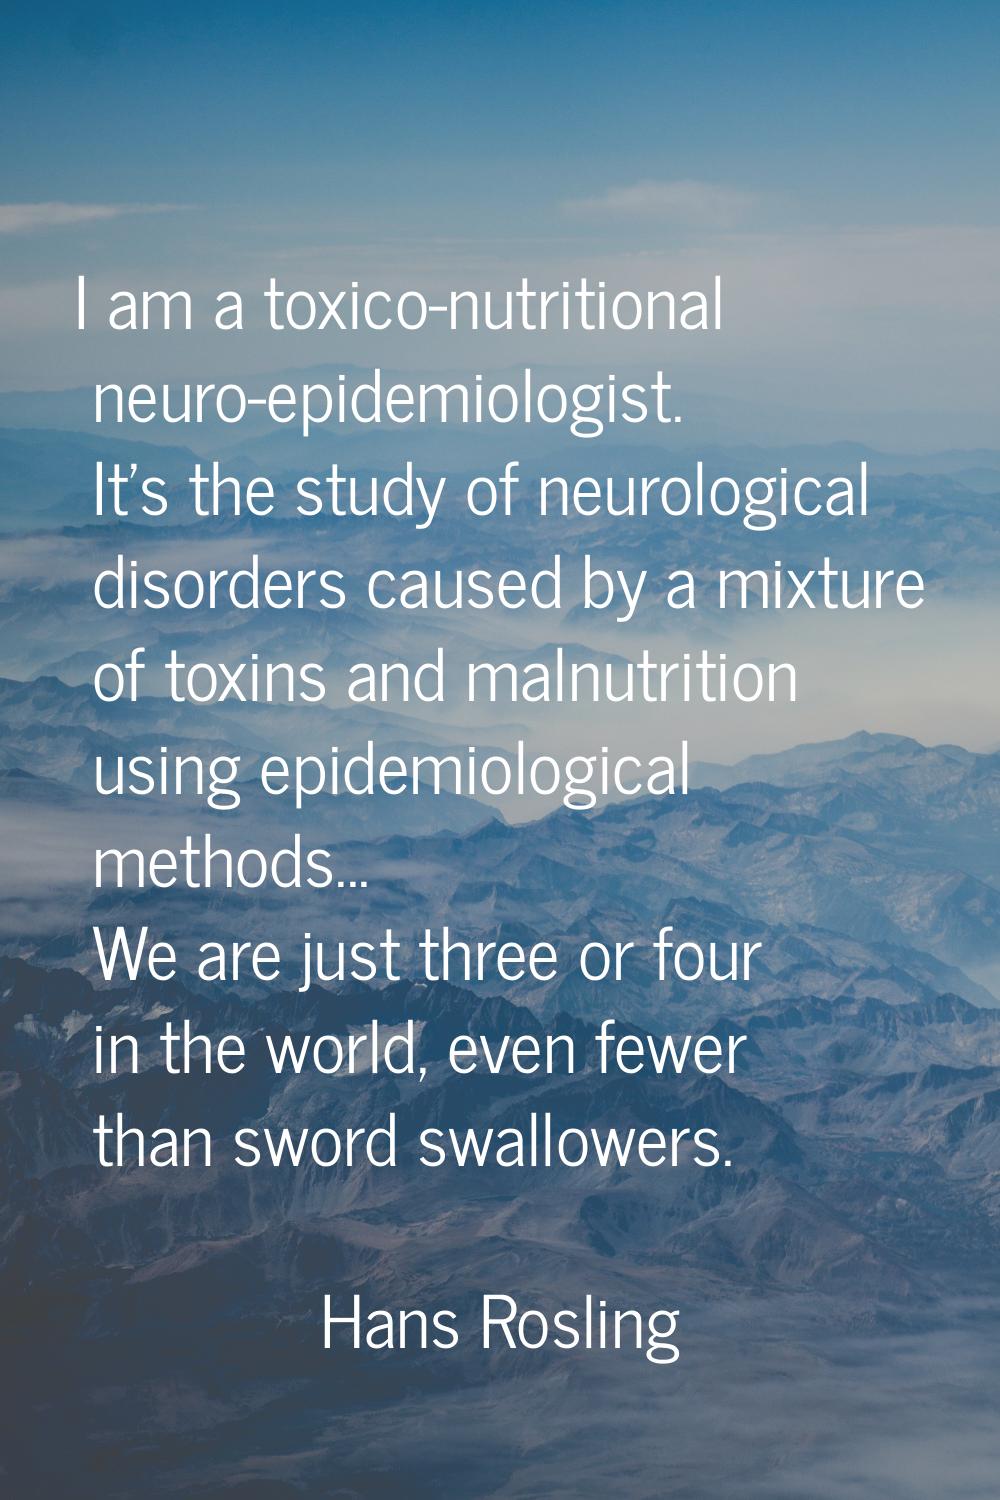 I am a toxico-nutritional neuro-epidemiologist. It's the study of neurological disorders caused by 